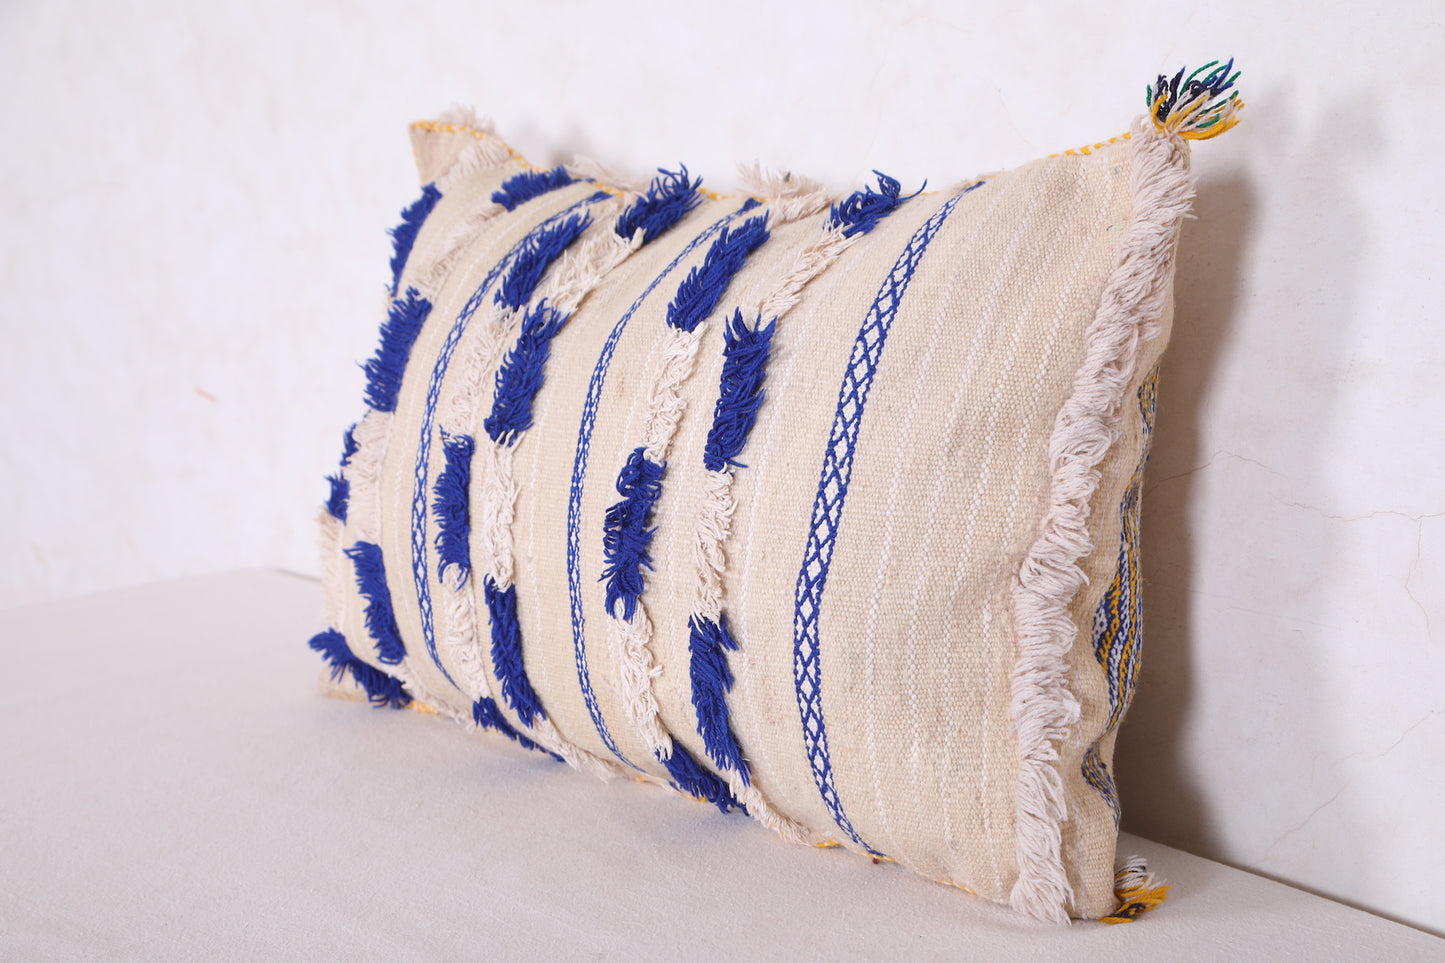 Vintage Moroccan Pillow 14.1 INCHES X 20.8 INCHES